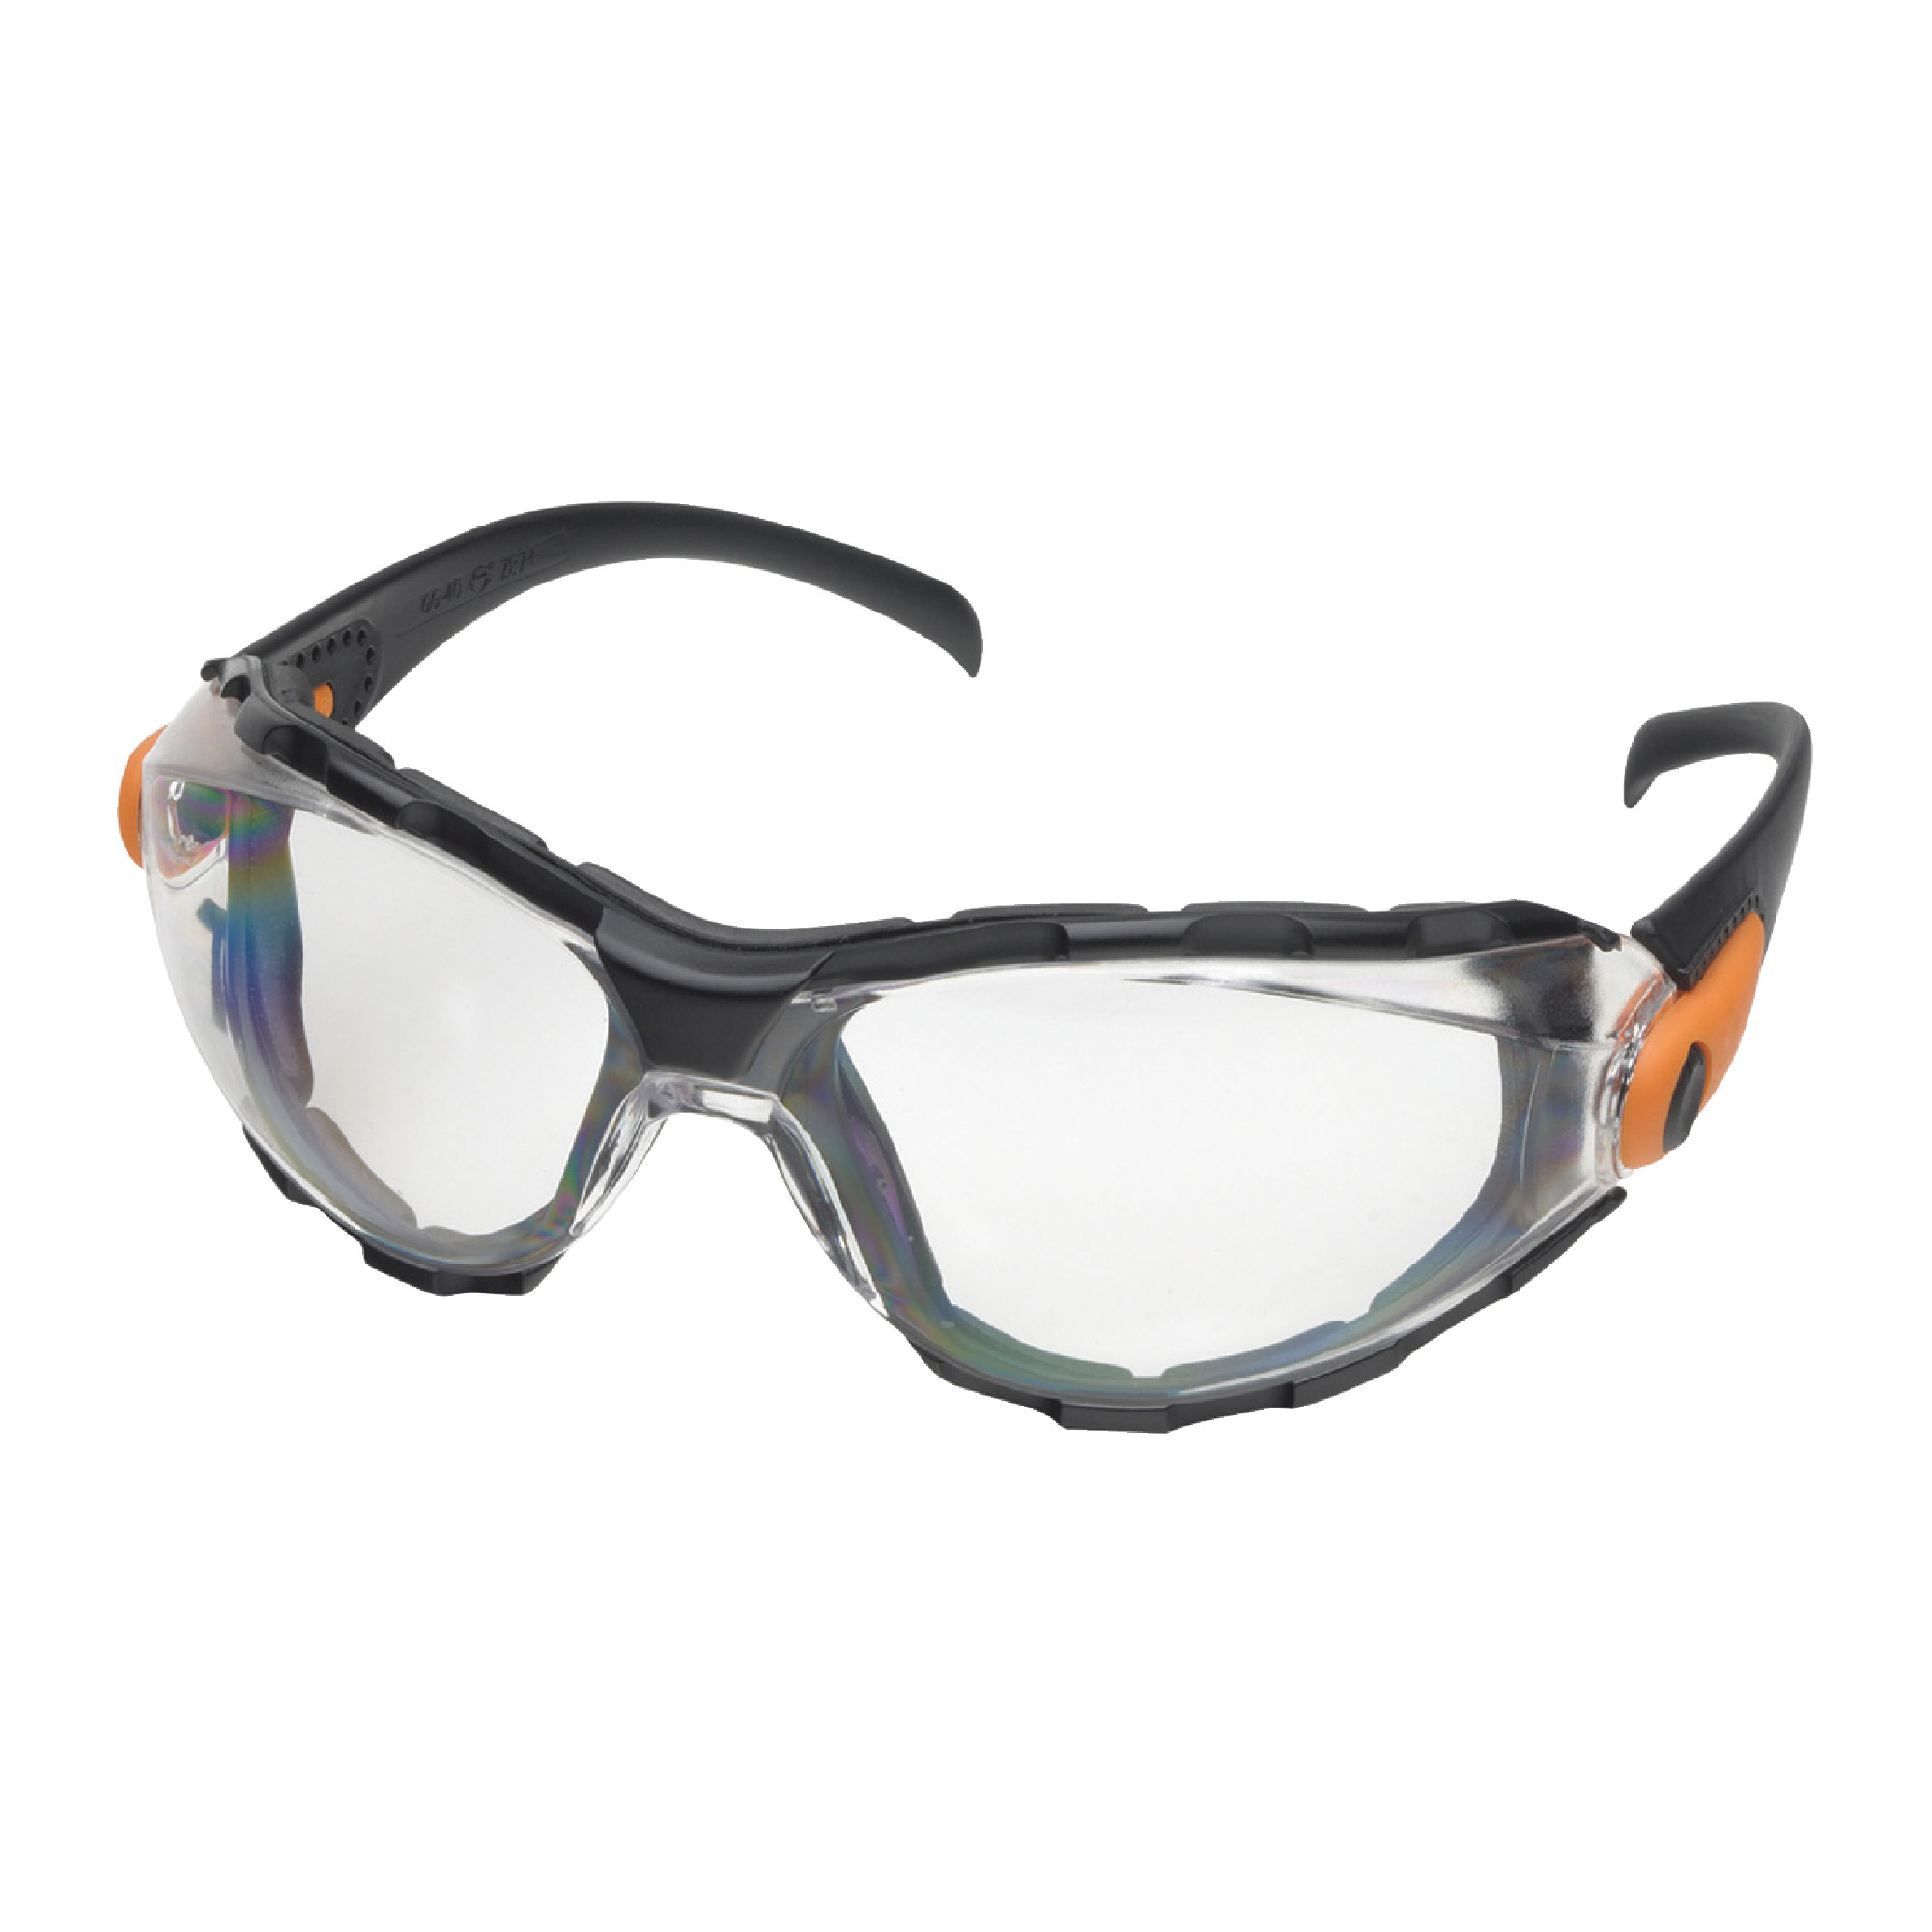 ELVEX Go Specs Clear Lens Safety Glasses With Anti-Fog Coating